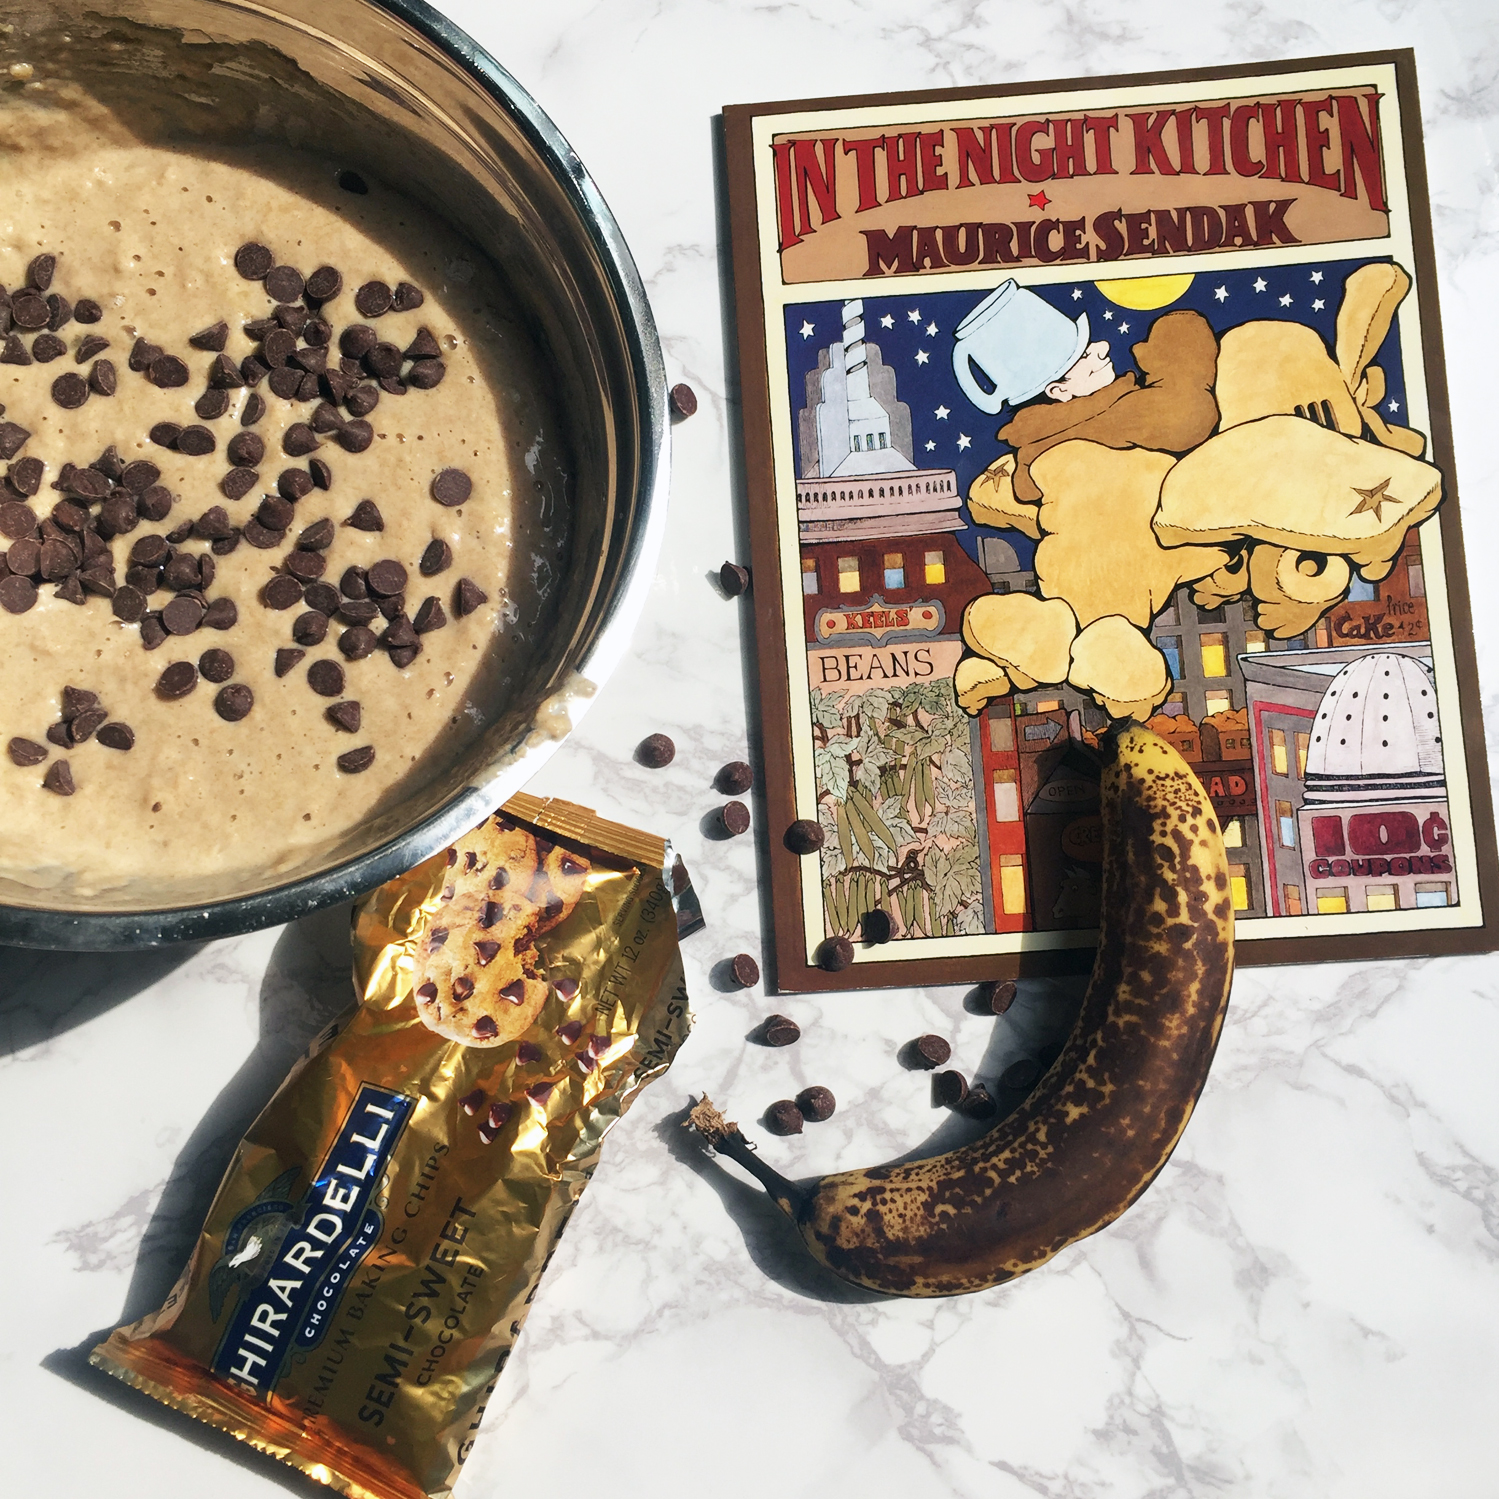 In the Night Kitchen by Maurice Sendak is a fan favorite in our house! Crazy to think that this is one of the top banned books in the country!